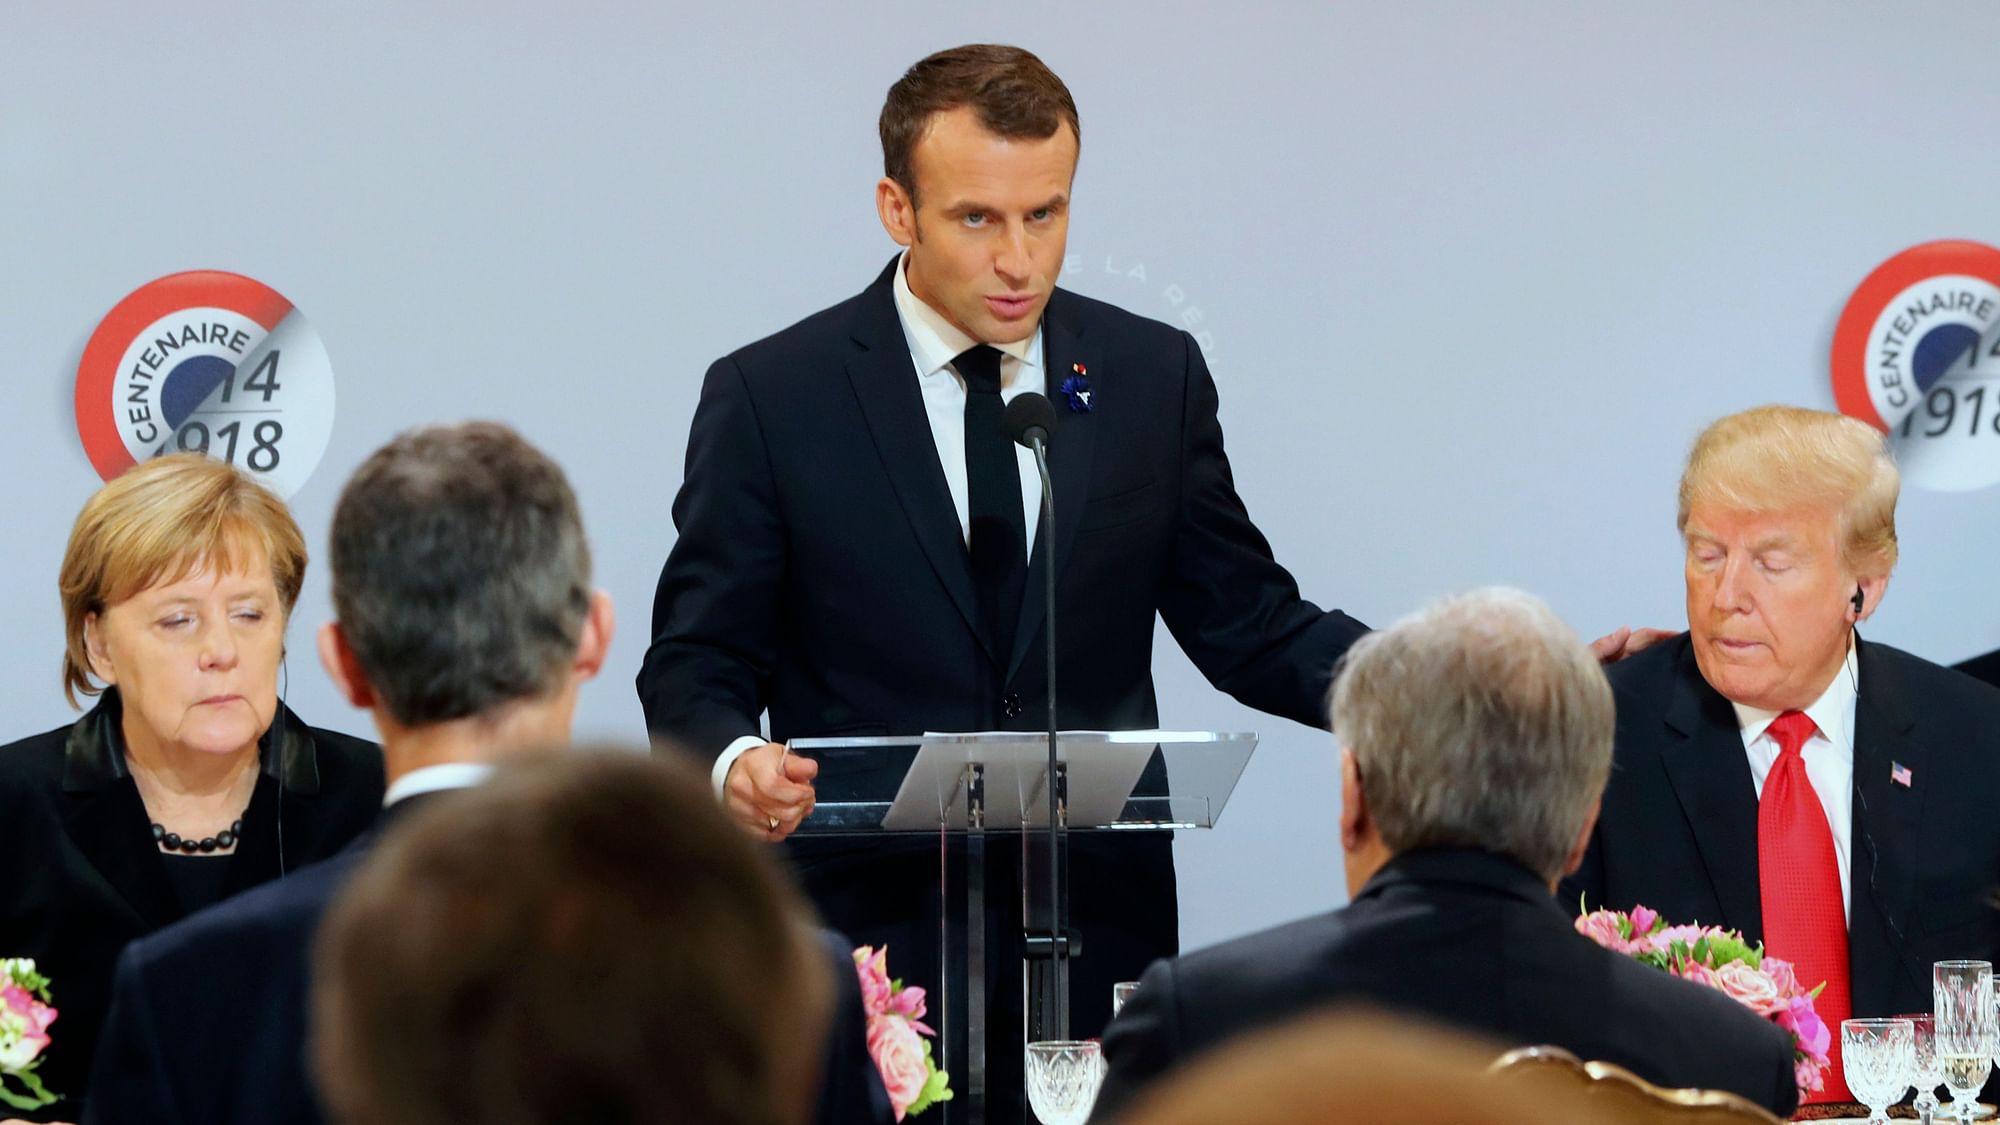 Macron delivered a stinging indictment of nationalism, calling it “the exact opposite” of the patriotism shown by soldiers.